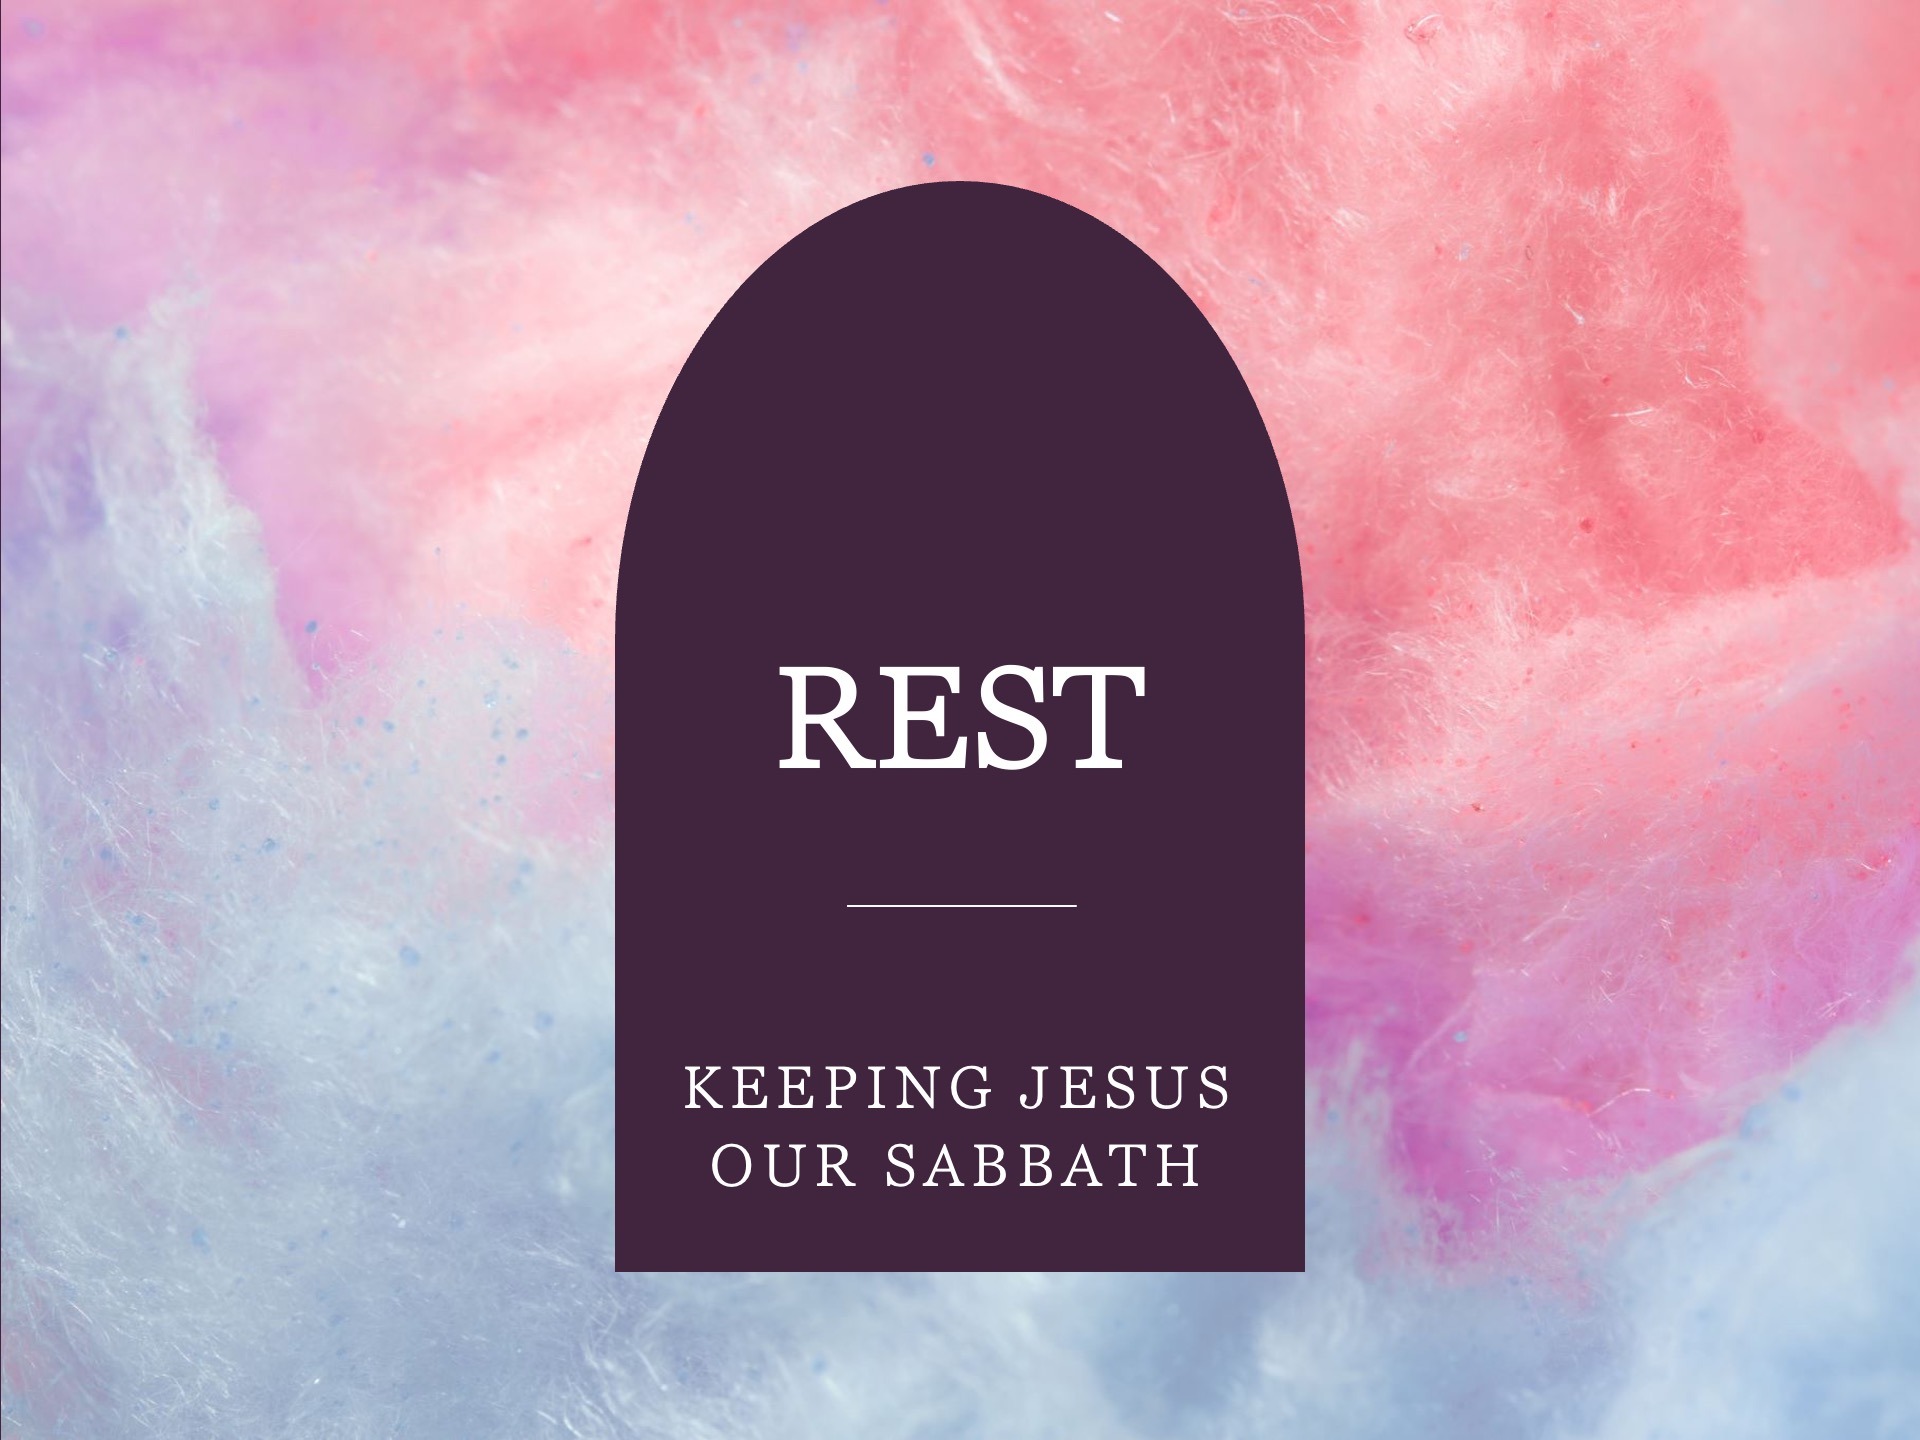 Rest: Following Jesus, His Path and Pace